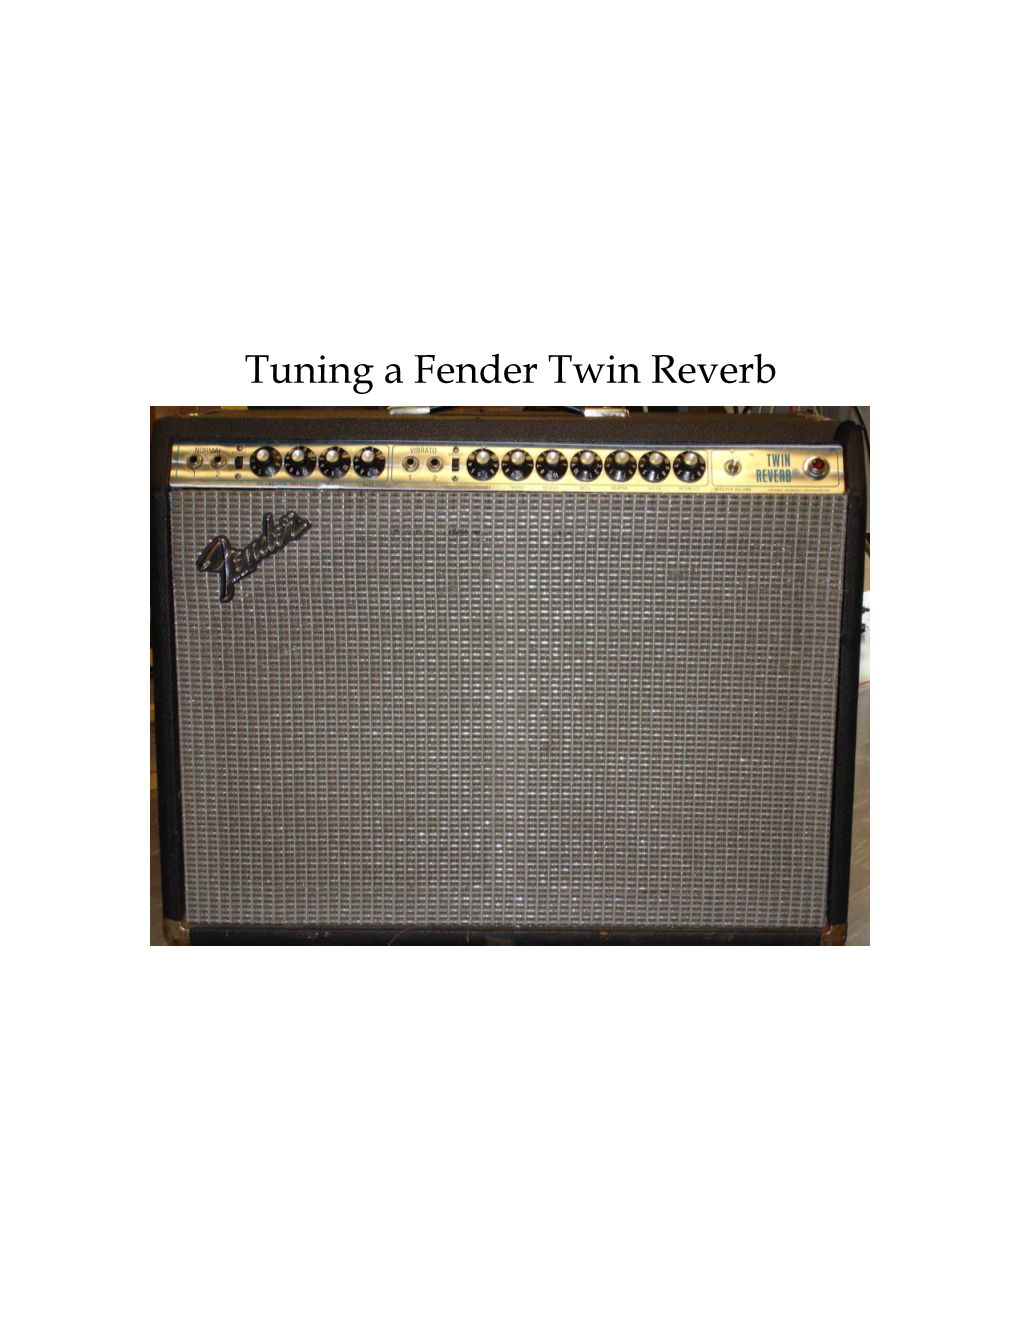 Tuning a Fender Twin Reverb